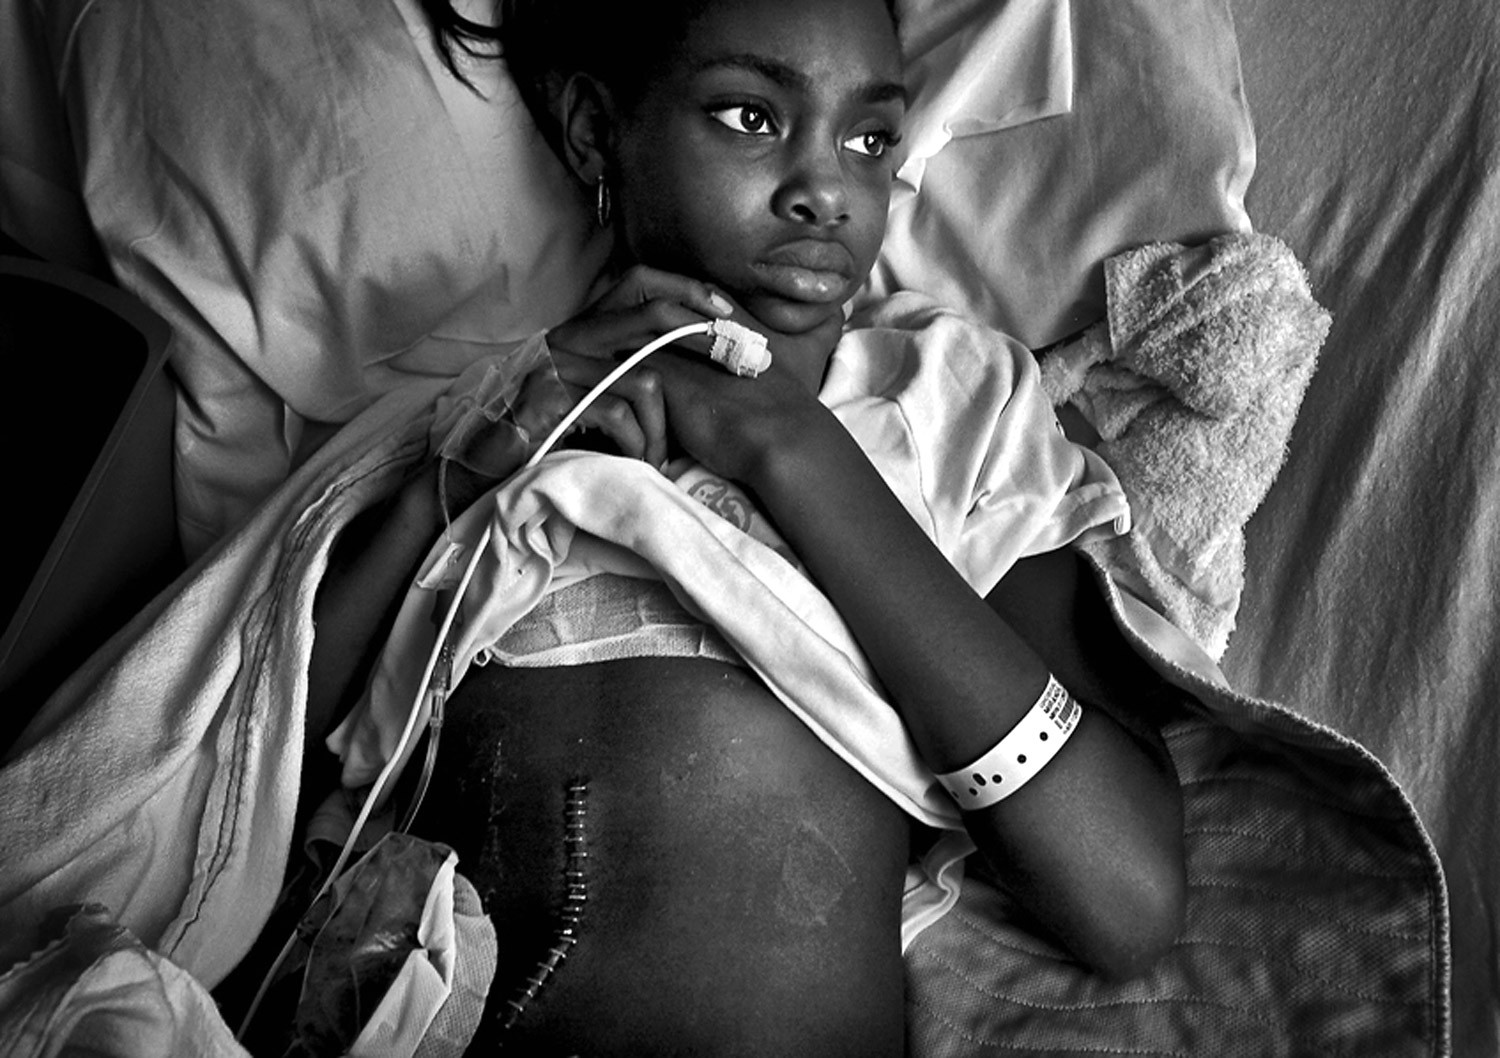 Erica Miranda waits for a bandage change at Long Beach Memorial Children's Hospital. She was shot three times while playing basketball outside her home in Compton, California. This photograph is from the Pulitzer Prize winning series,  Caught in the Crossfire  by the Barbara Davidson of the Los Angeles Times.